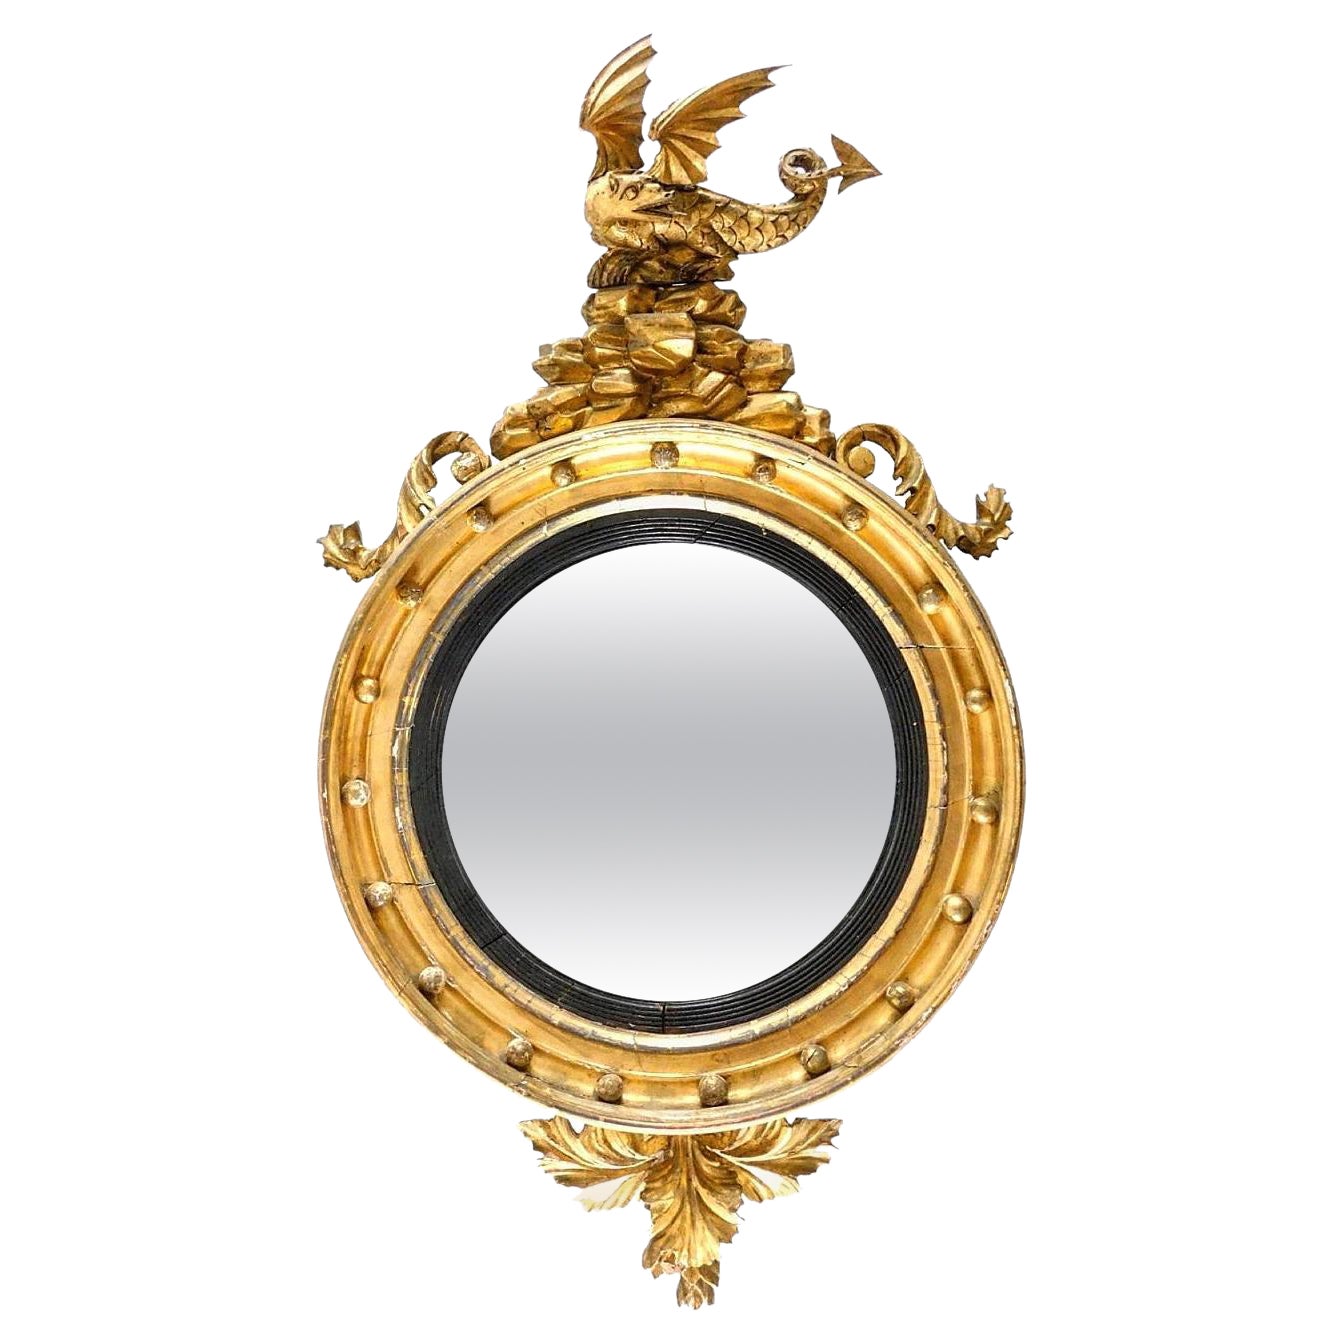 19th Century Carved Giltwood Convex Mirror